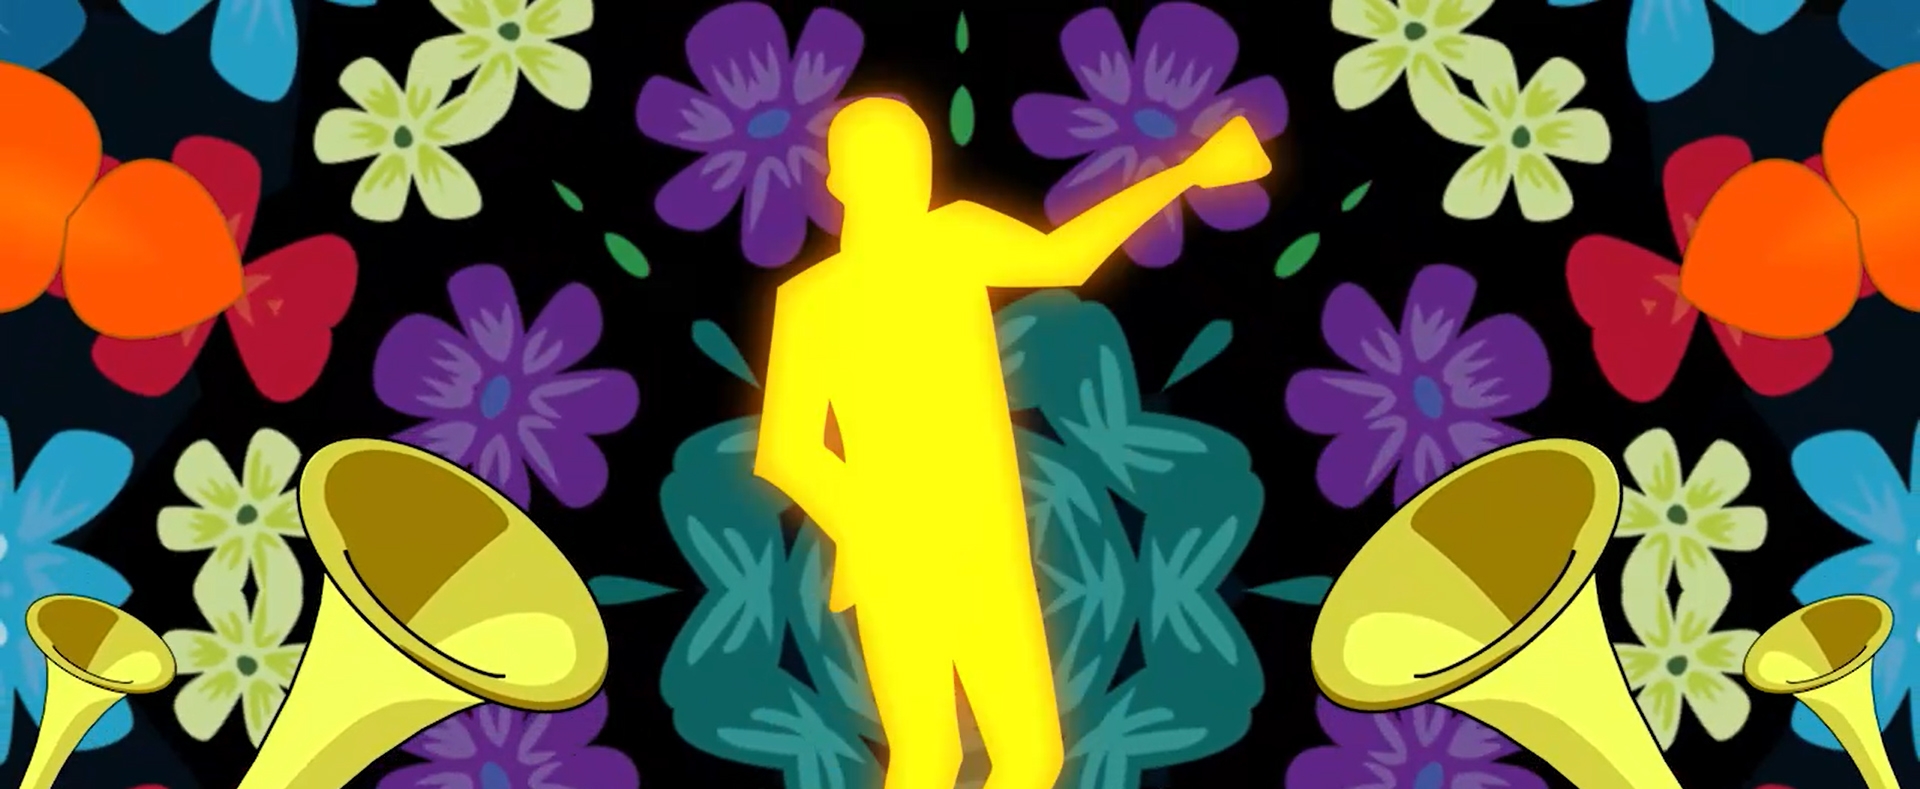 Still of a dancing man with trumpets and background full of flowers - Toots & The Maytals - Three Little Birds Animated Music Video